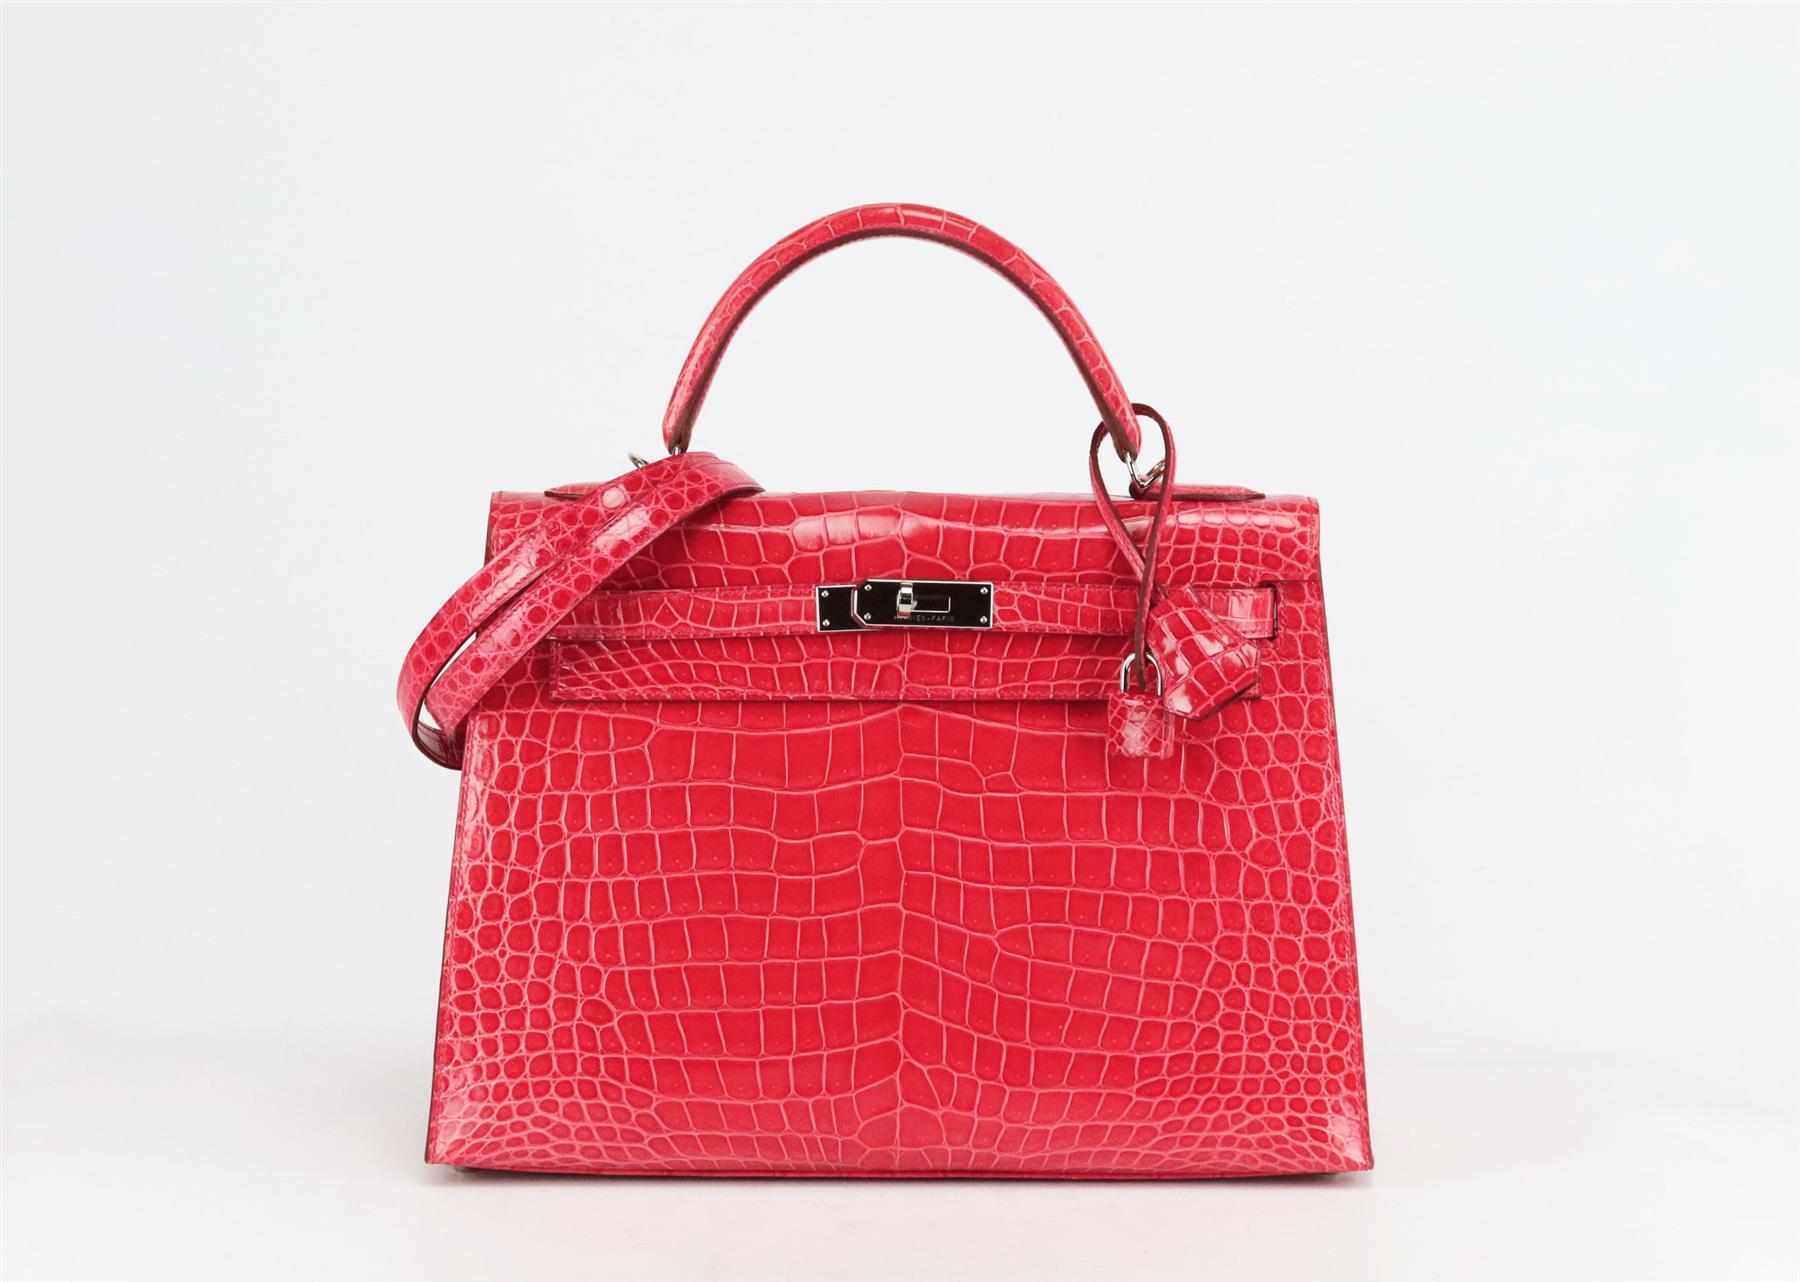 <ul>
<li>Made in France, this beautiful 2015 Hermès ‘Kelly Sellier’ 32cm handbag has been made from shiny Porosus Crocodile exterior in coral and matching leather interior, this piece is decorated with palladium hardware on the front and finished